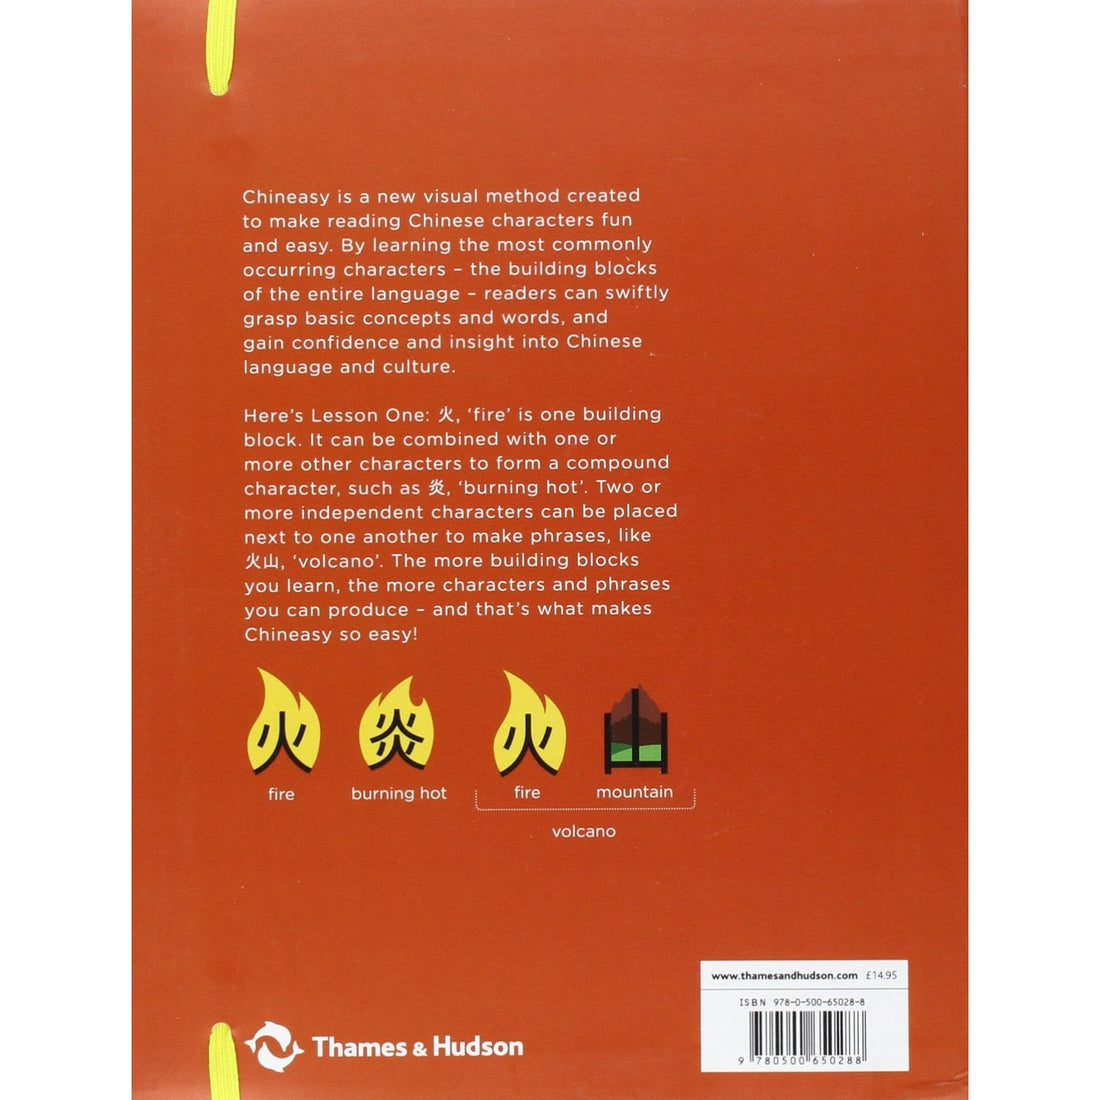 book-chineasy-the-new-way-to-read-chinese- (2)